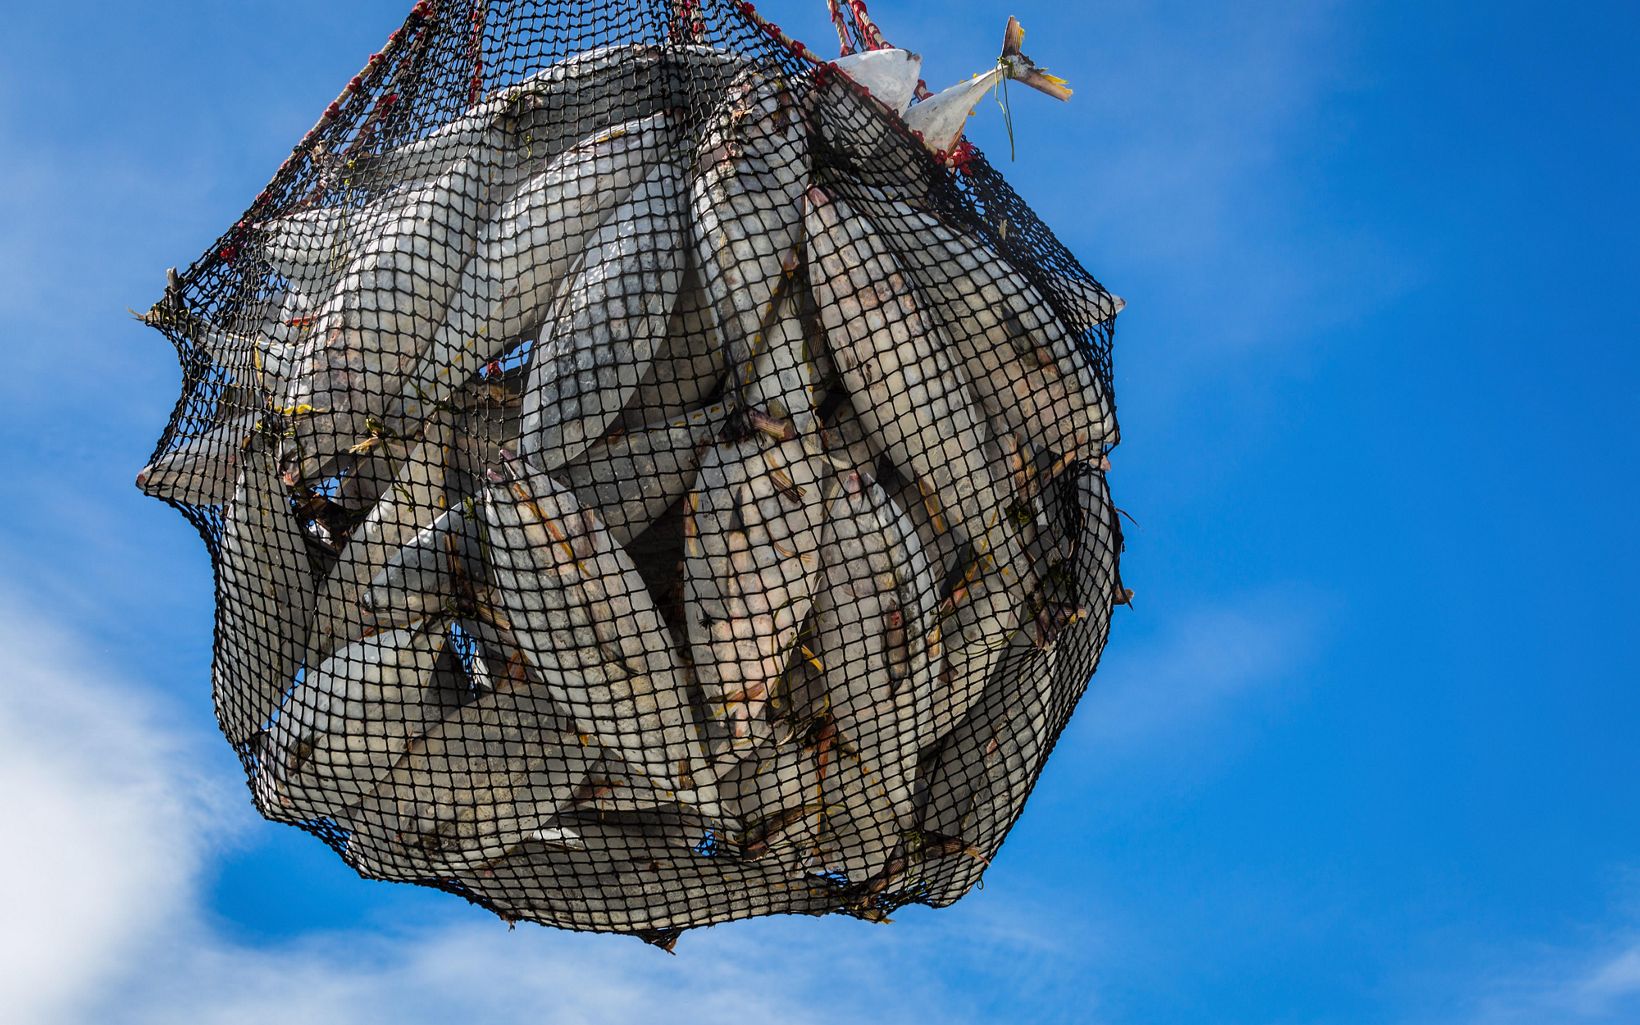 A suspended net full of tuna.